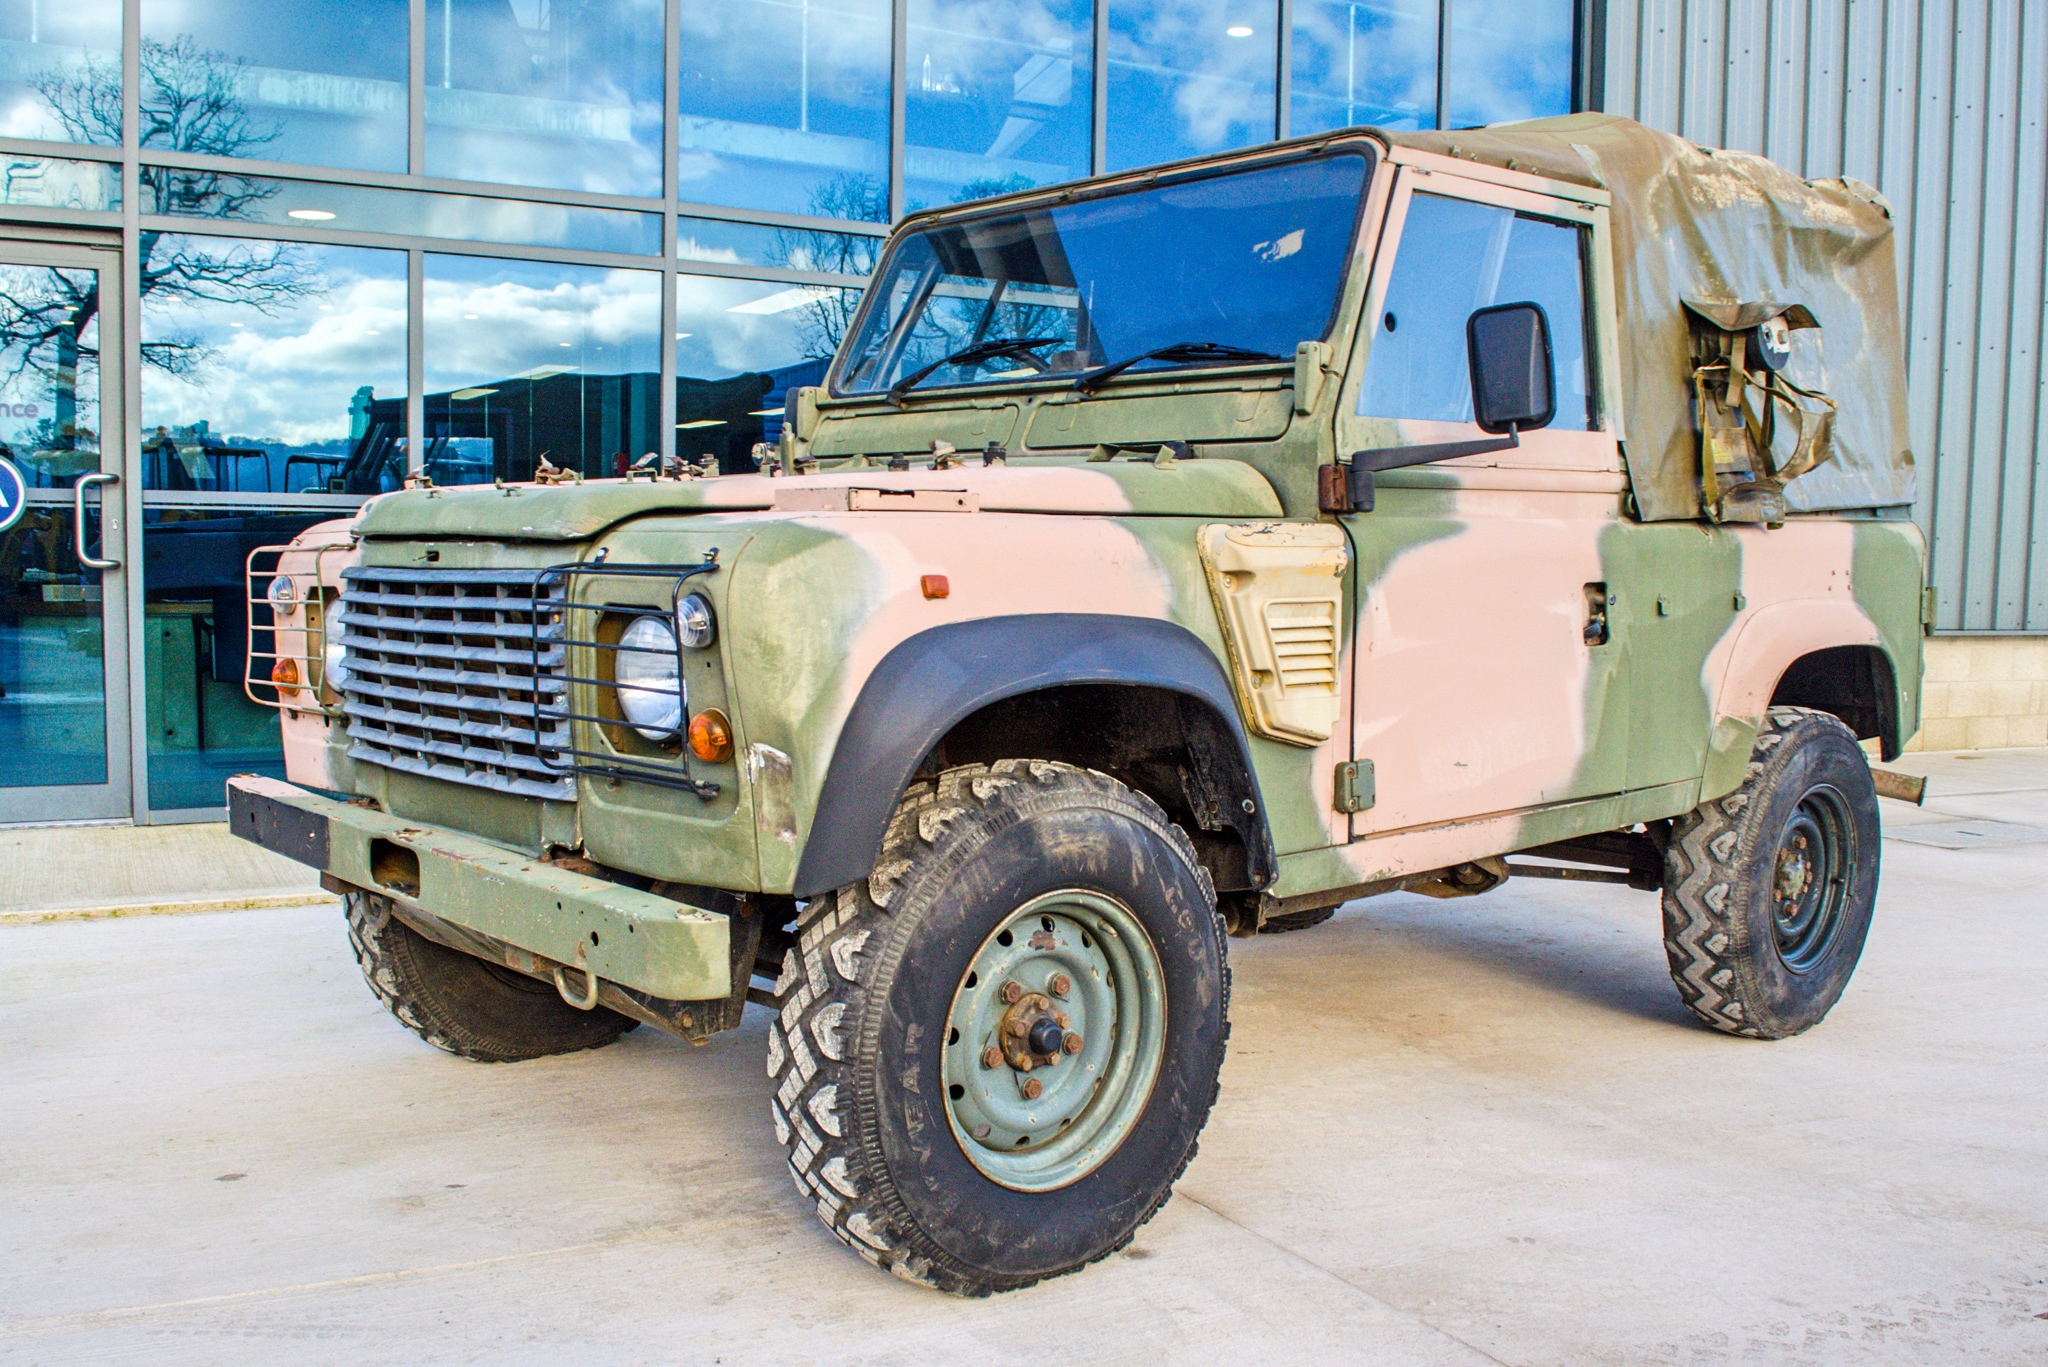 1998 Land Rover Defender 90 WOLF 2,5 litre 300TDI 4 wheel drive utility vehicle Ex MOD - Image 3 of 44